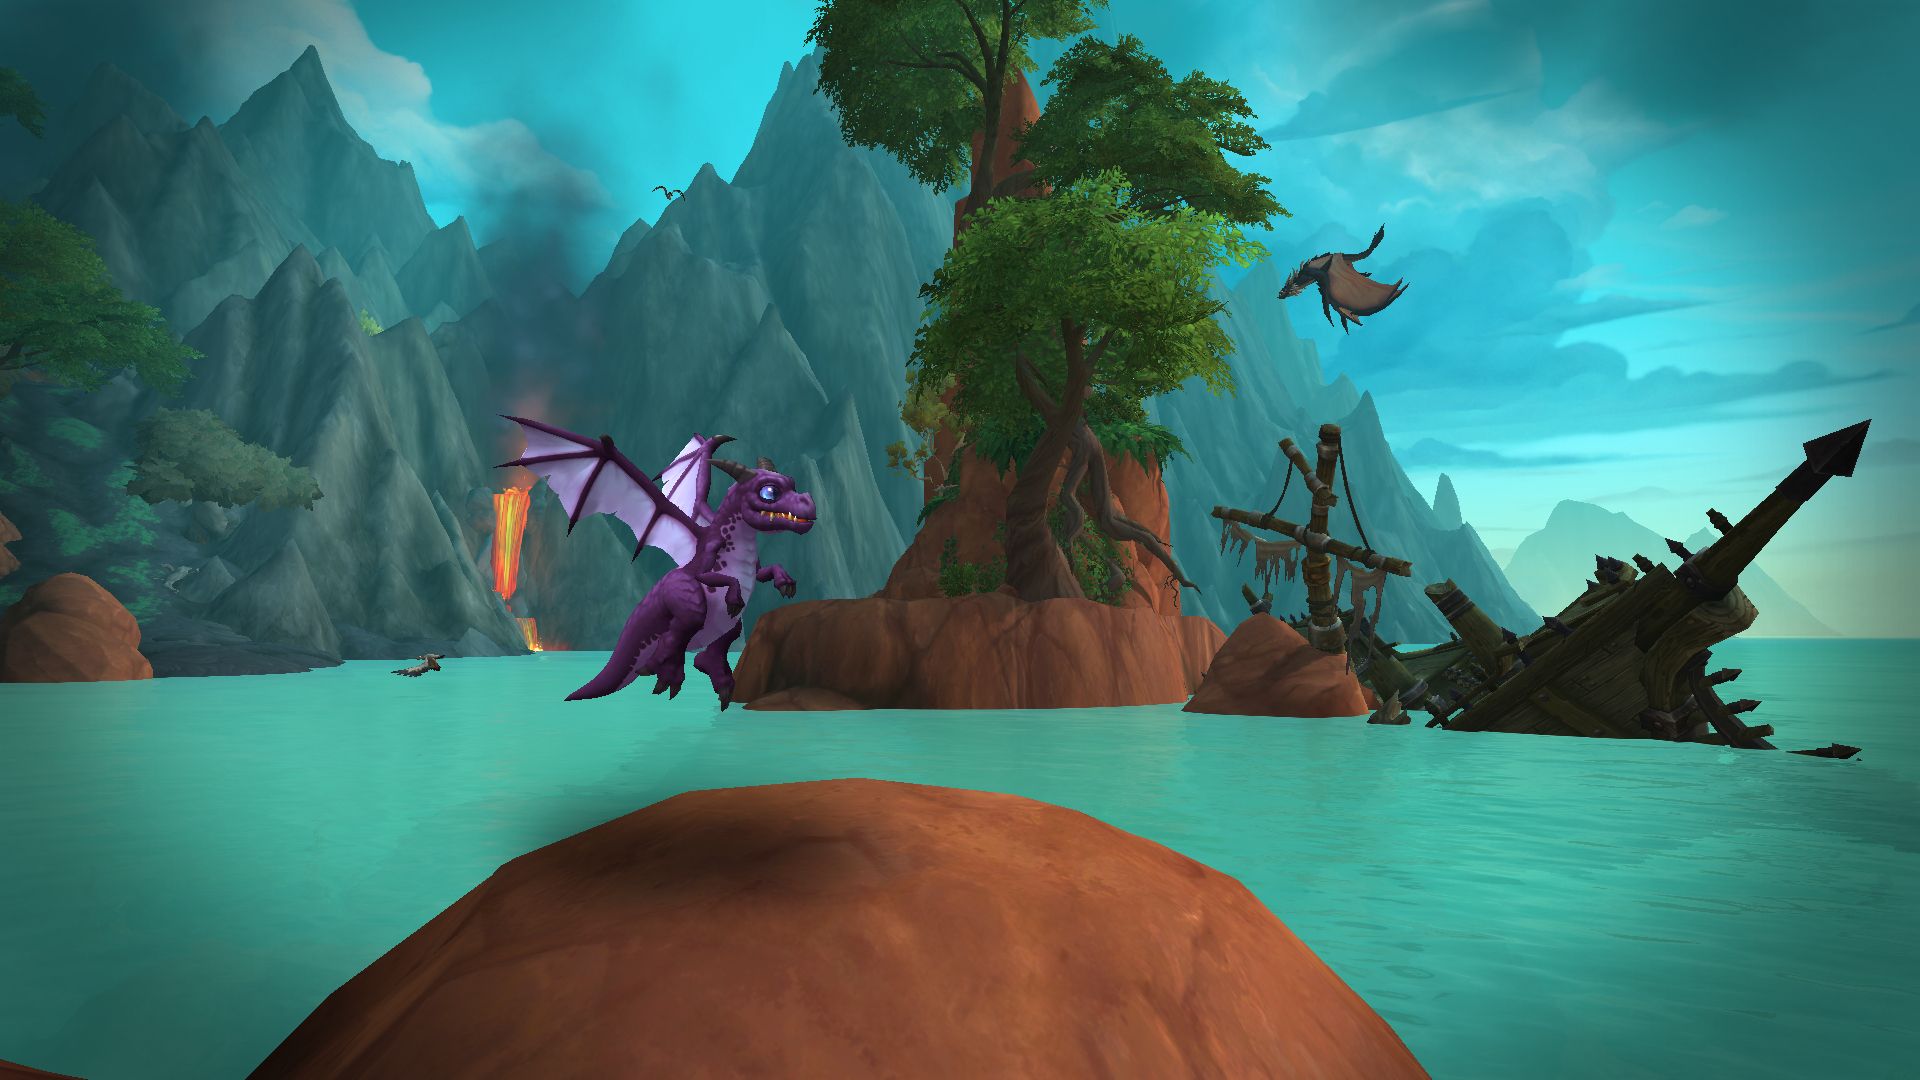 The purple whelp pet, Spyragos, beside a sunken ship in the Waking Shores.